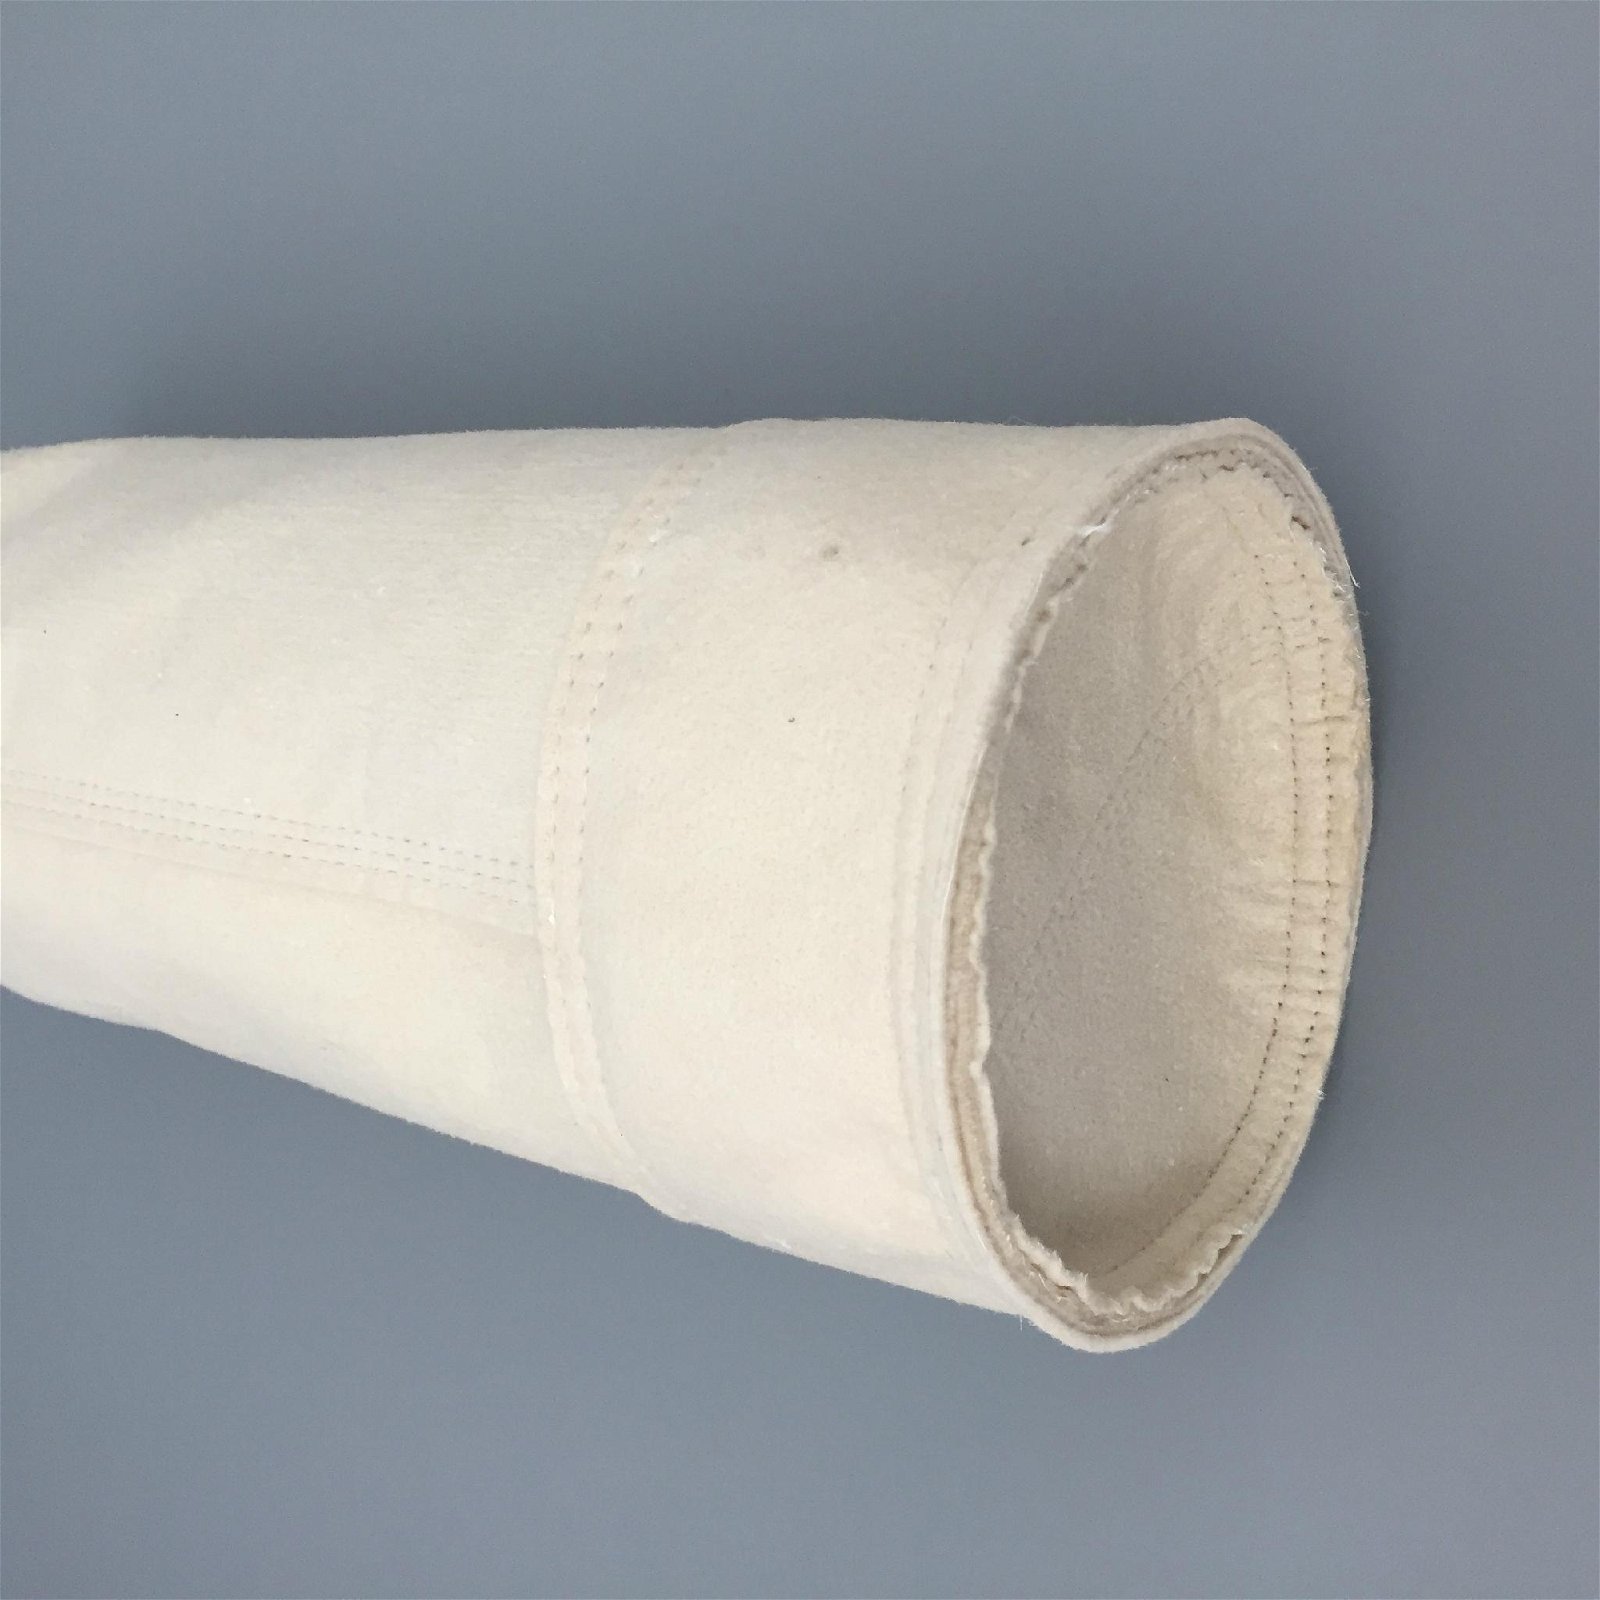 Industrial PE Filter Bag by non-woven needle felt